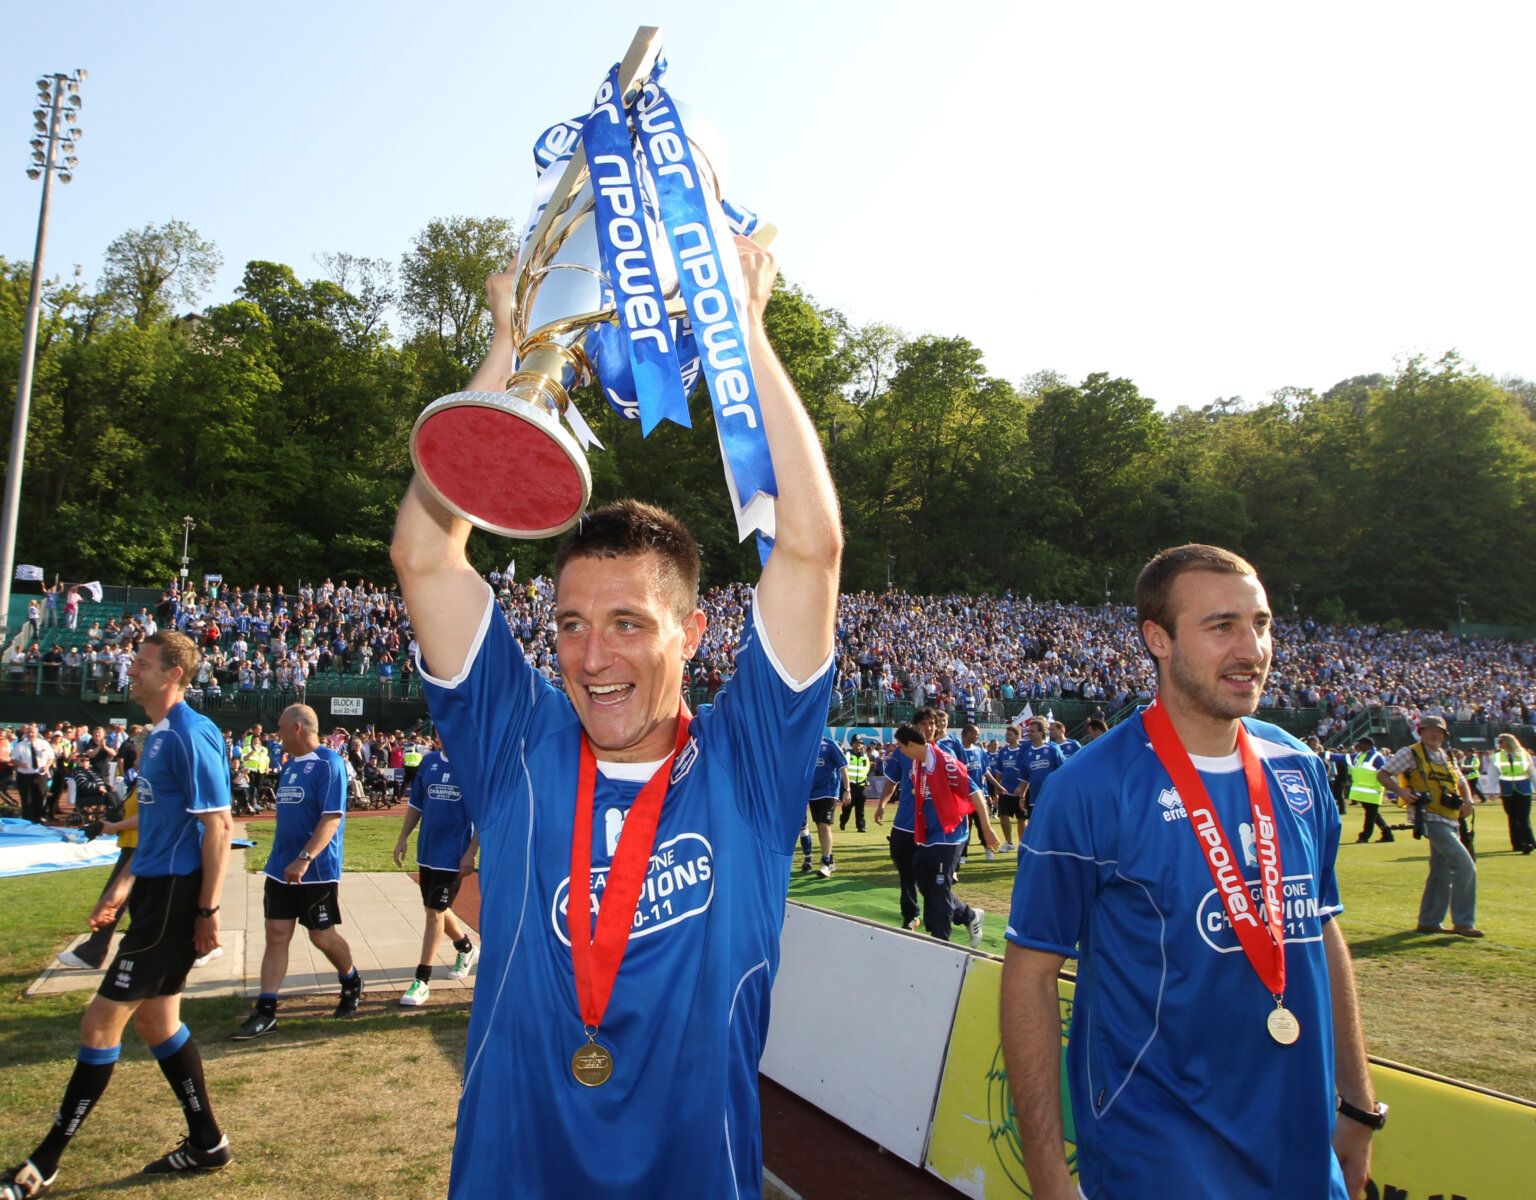 Football - Brighton &amp; Hove Albion v Huddersfield Town - npower Football League One - The Withdean Stadium - 10/11 - 30/4/11 
Marcos Painter - Brighton (C) celebrates winning League One with the trophy and promotion to the Championship 
Mandatory Credit: Action Images / Phil Cole